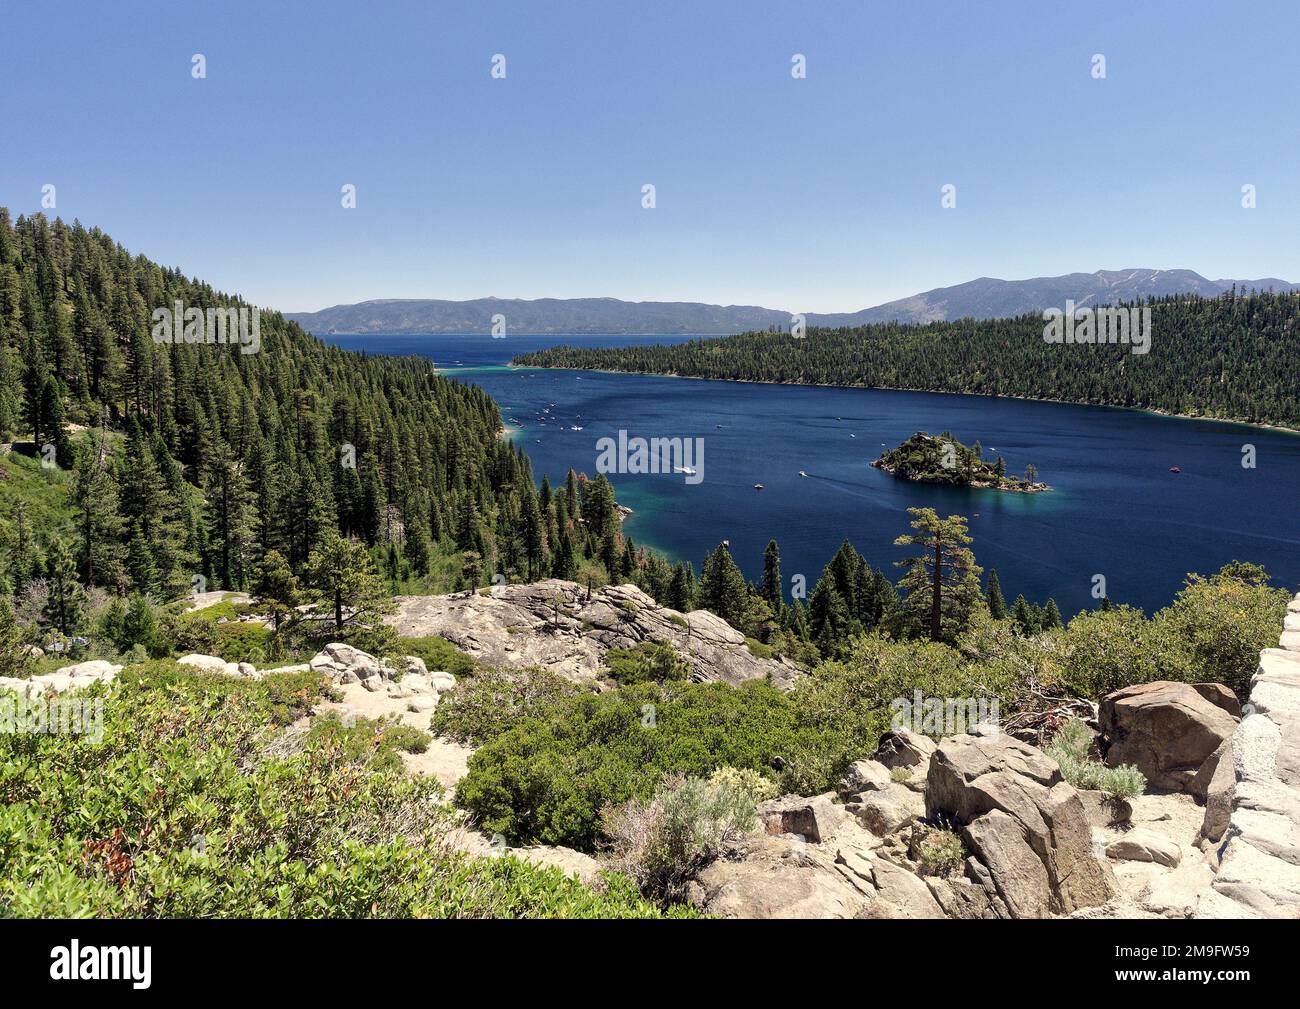 The view of Emerald Bay the only inlet on Lake Tahoe and Fannette Island the only island reputed to be the most photographed on Earth by some. Stock Photo